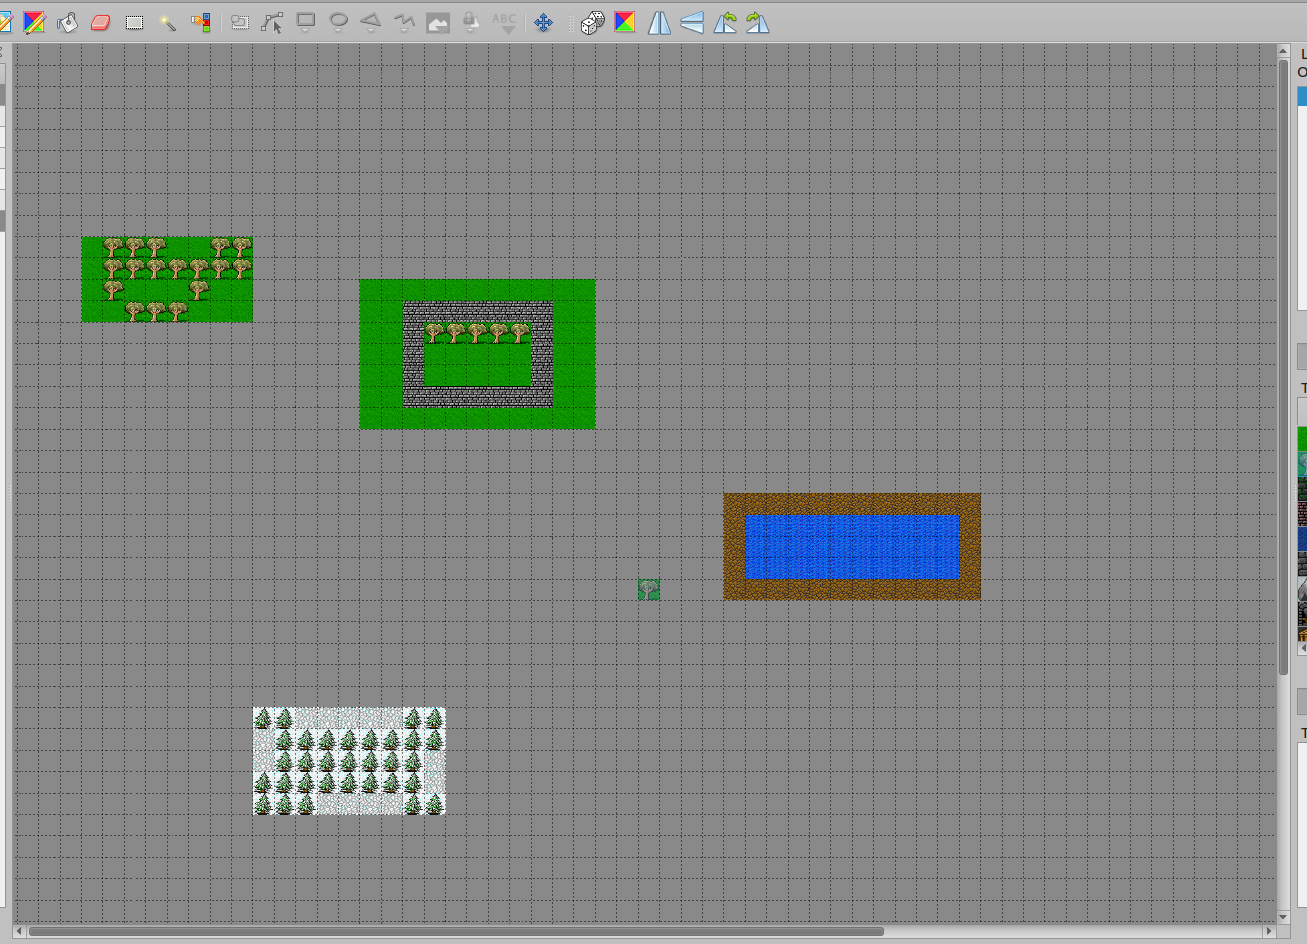 An initial view of an infinite map being edited in Tiled. The grid extends beyond the bounds of the editing window.